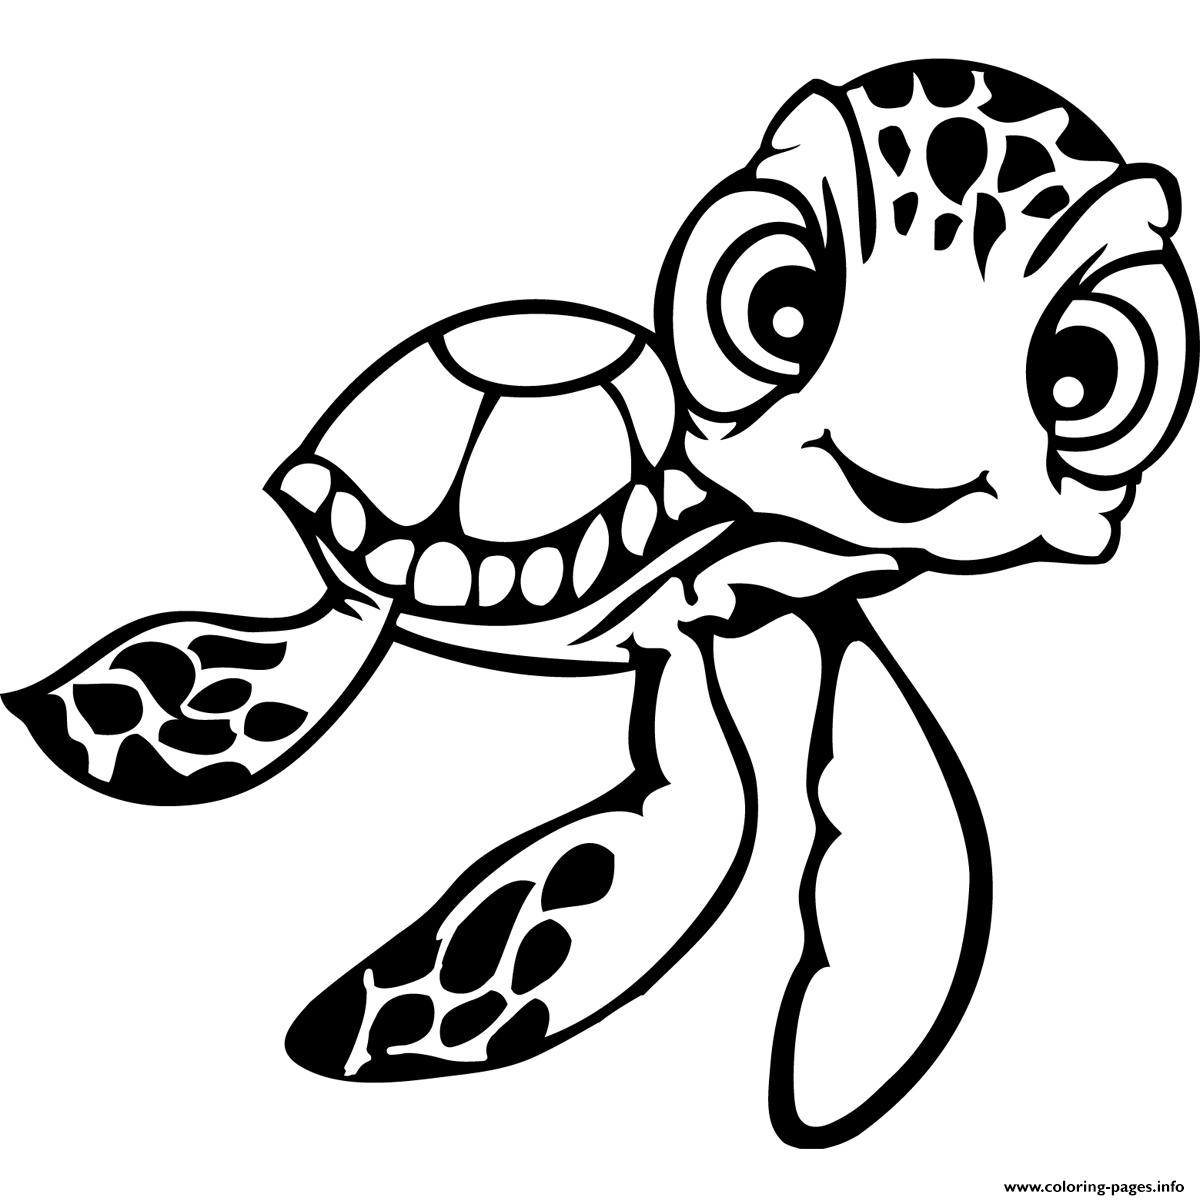 Squirt Finding Nemo Disney coloring pages